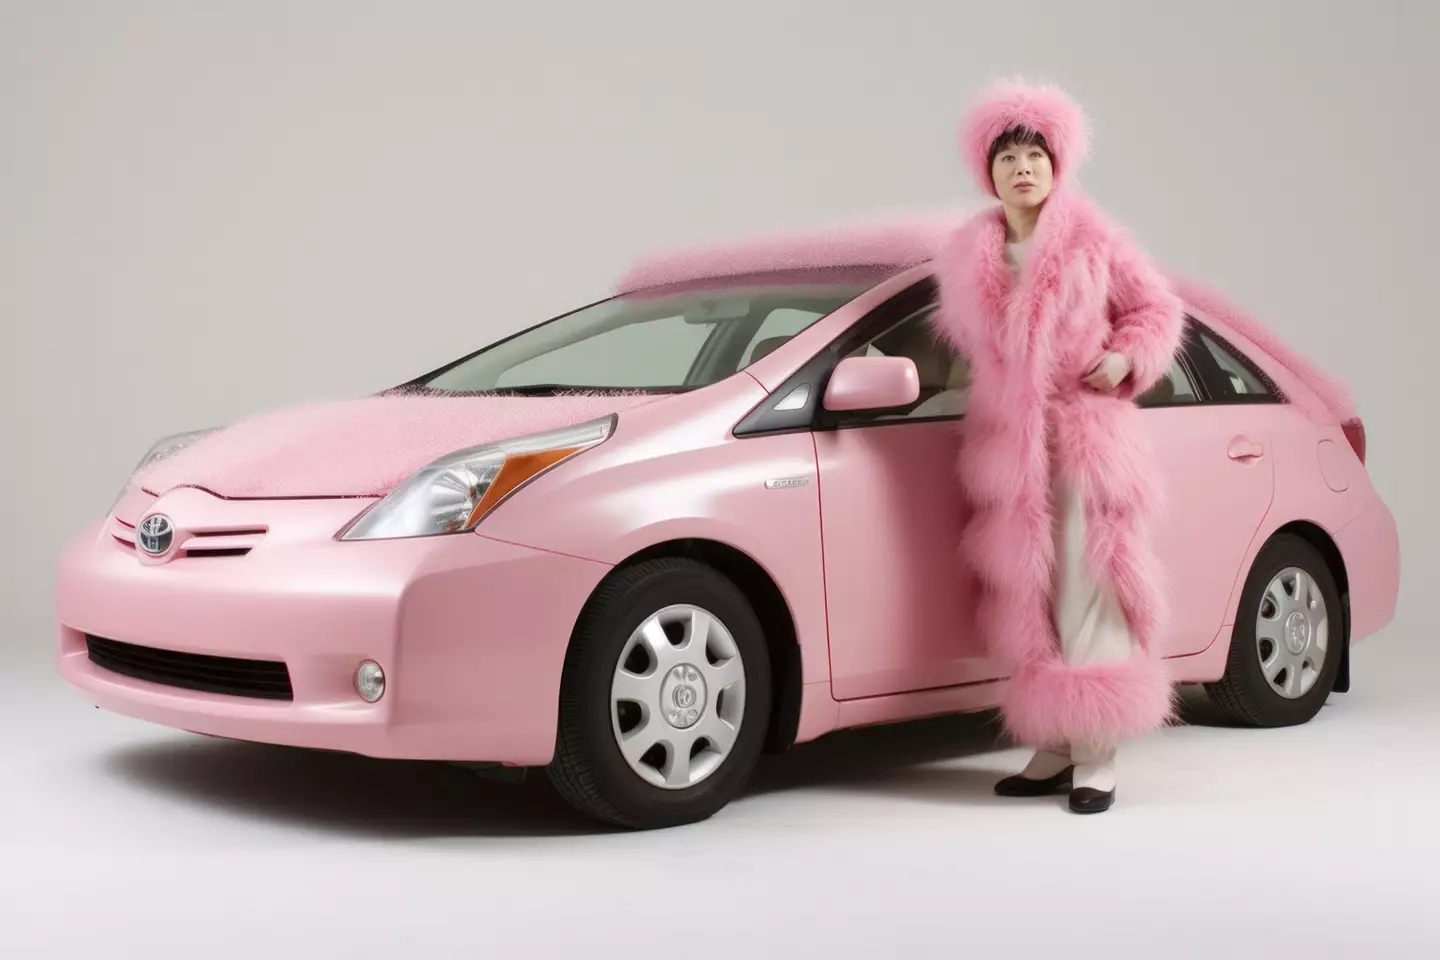 Why is the Toyota Prius pink and fluffy? (Reddit/u/8bitremixguy)